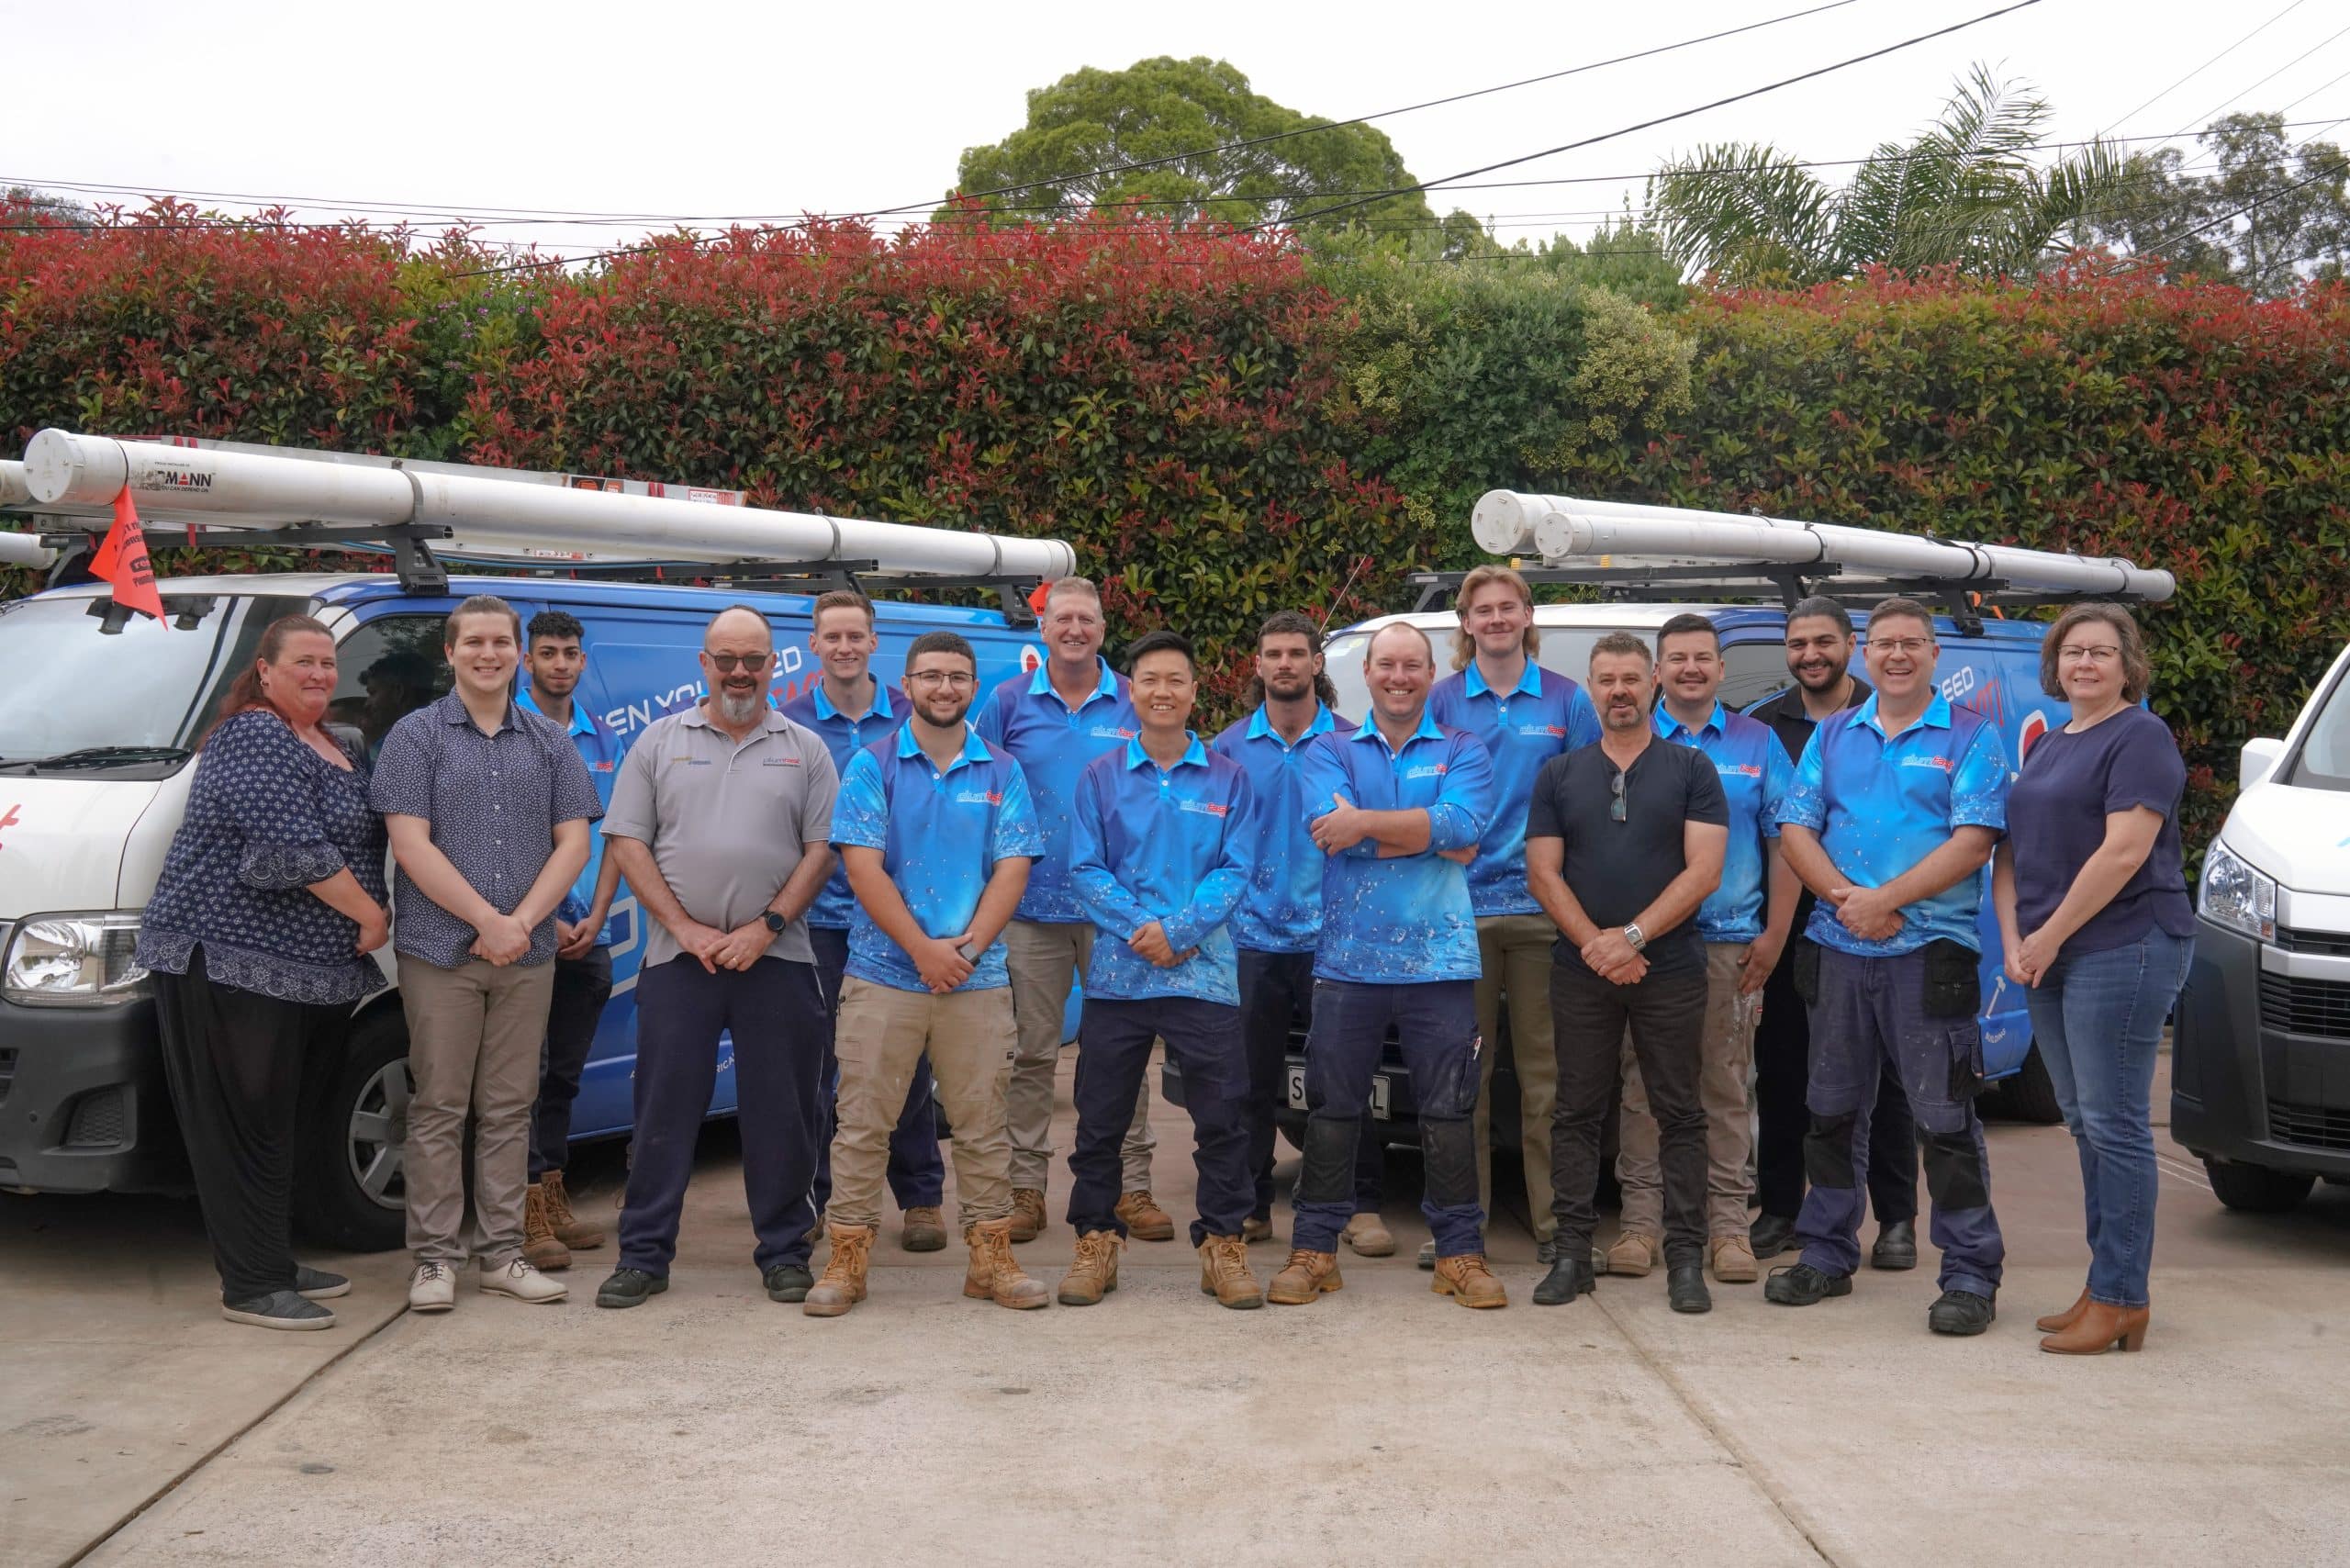 about us modern plumbing solutions Plumbing Services trusted Plumber Adelaide Going Above And Beyond Gas Plumber Plumber Near Me Gas Plumber Handyman Adelaide